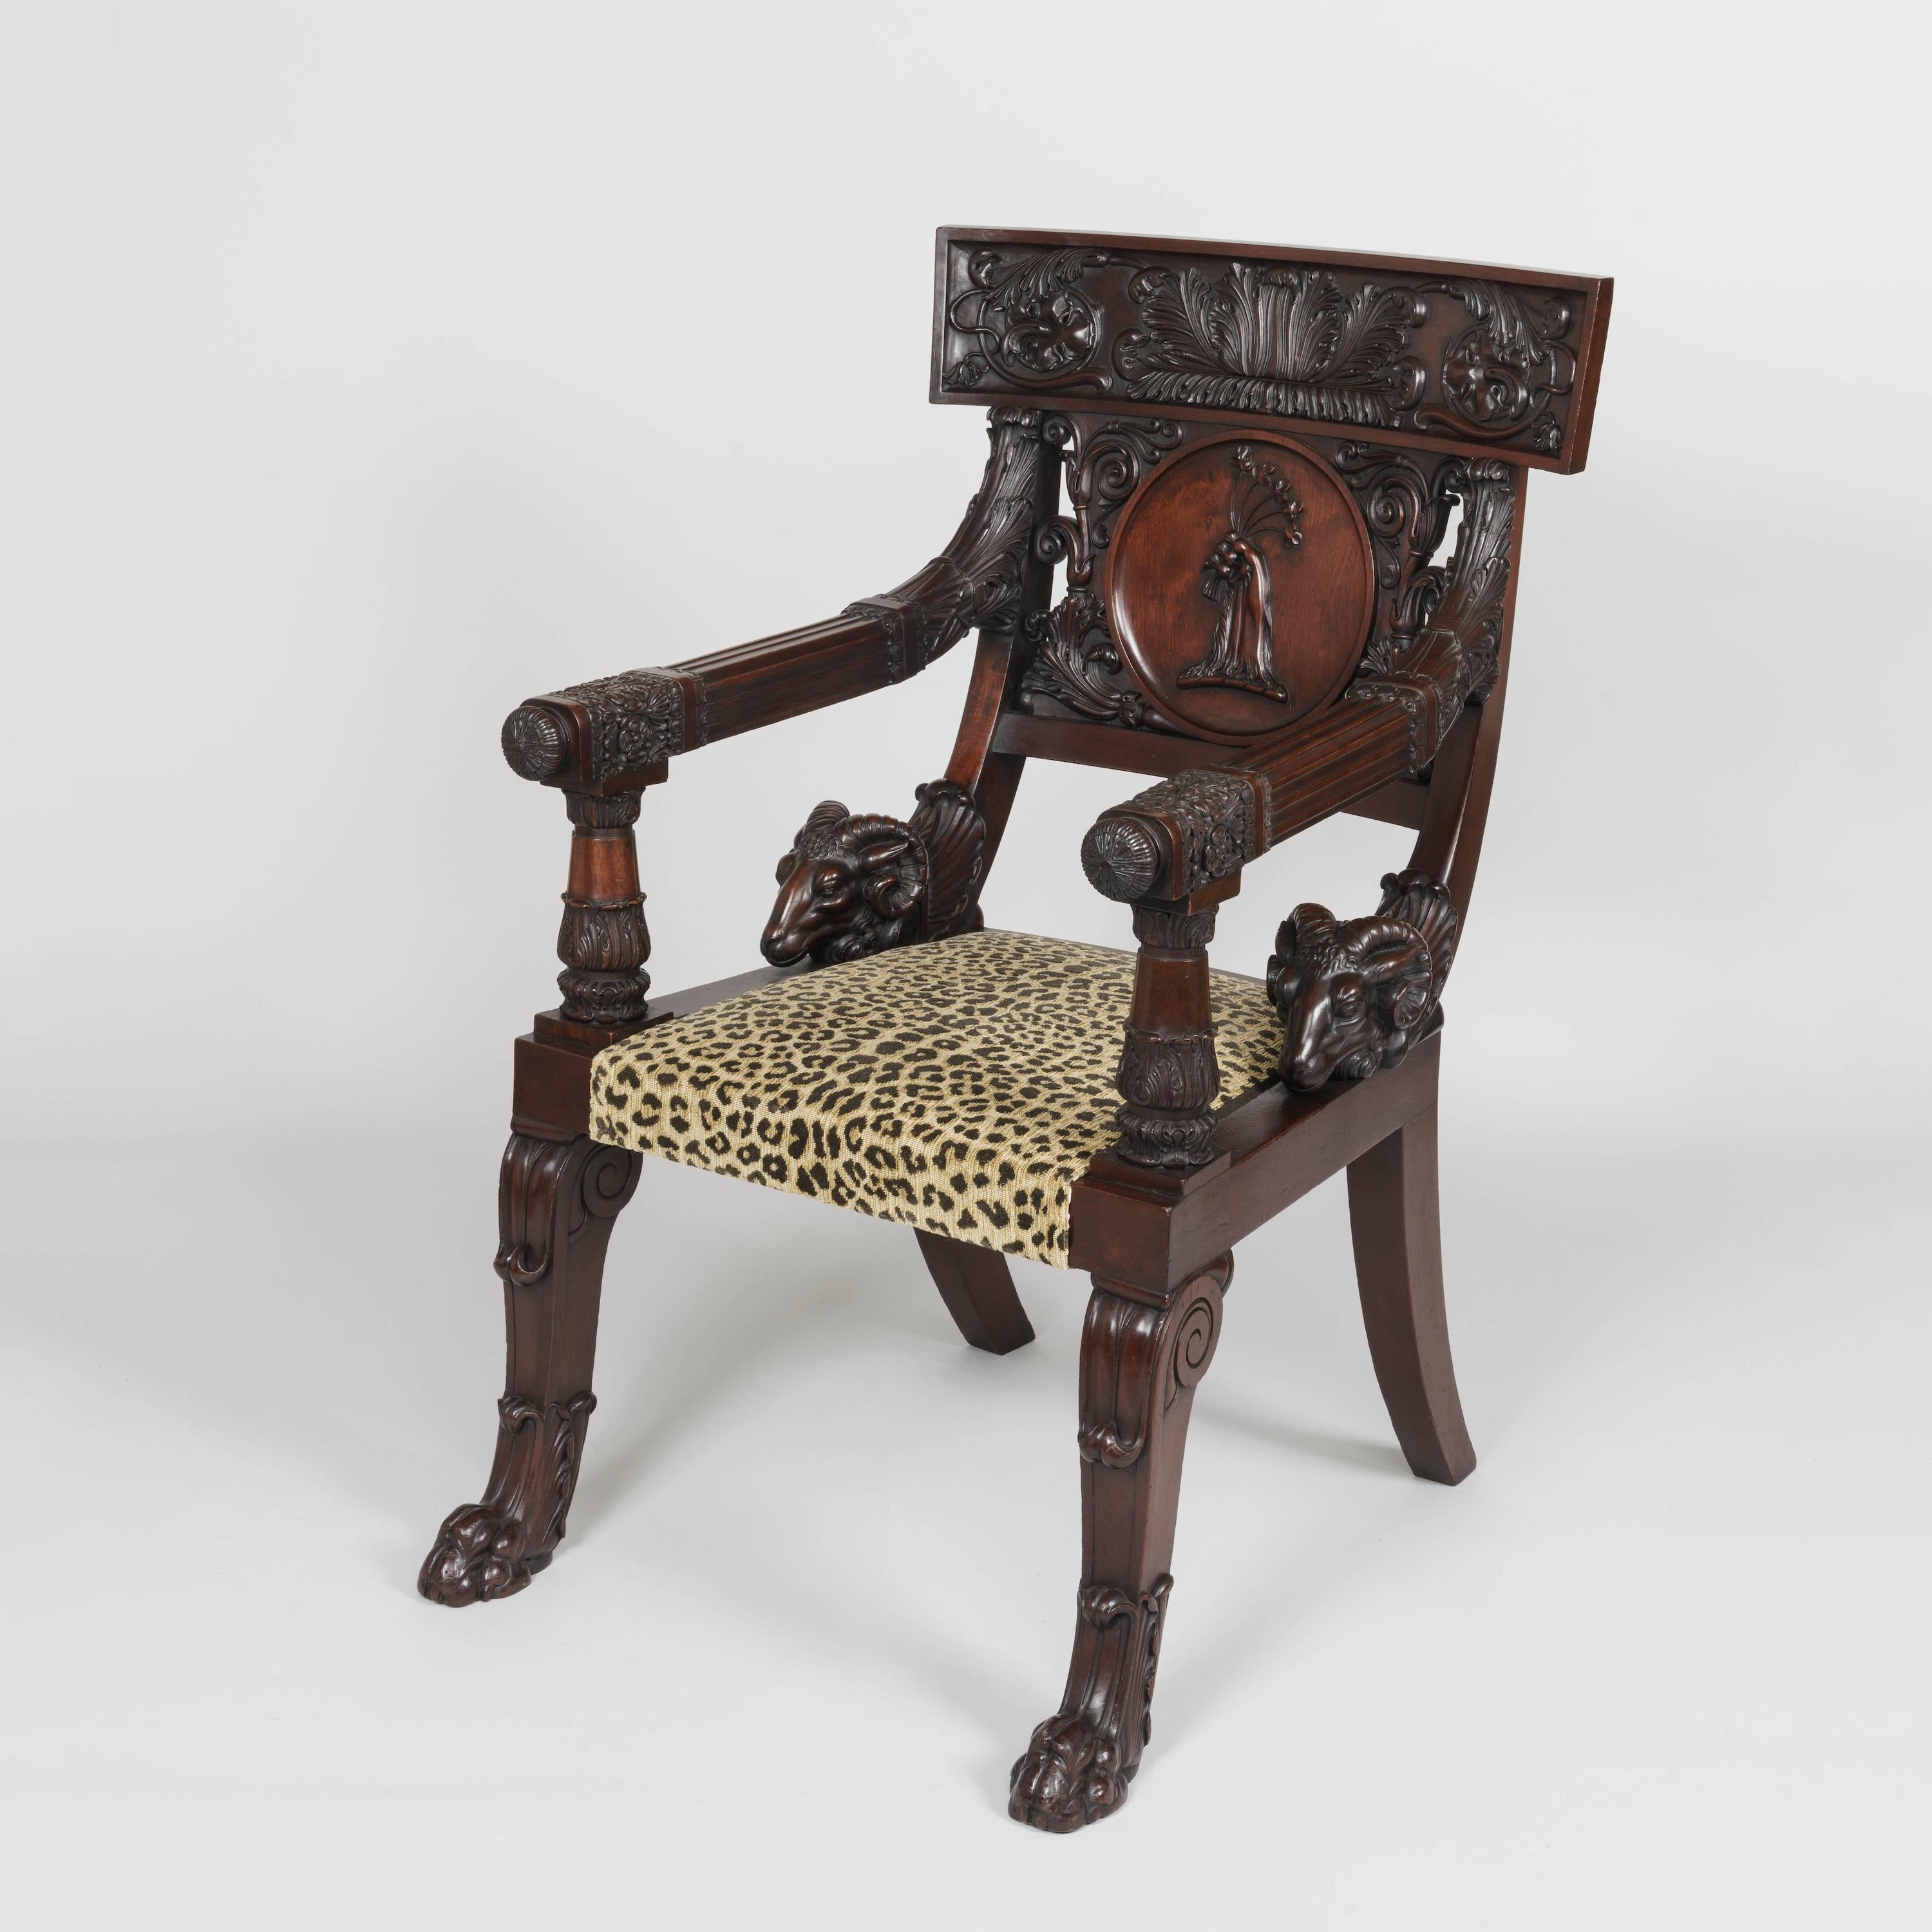 Pair of 19th Century Mahogany Klismos Armchairs after a Design by Thomas Hope For Sale 1